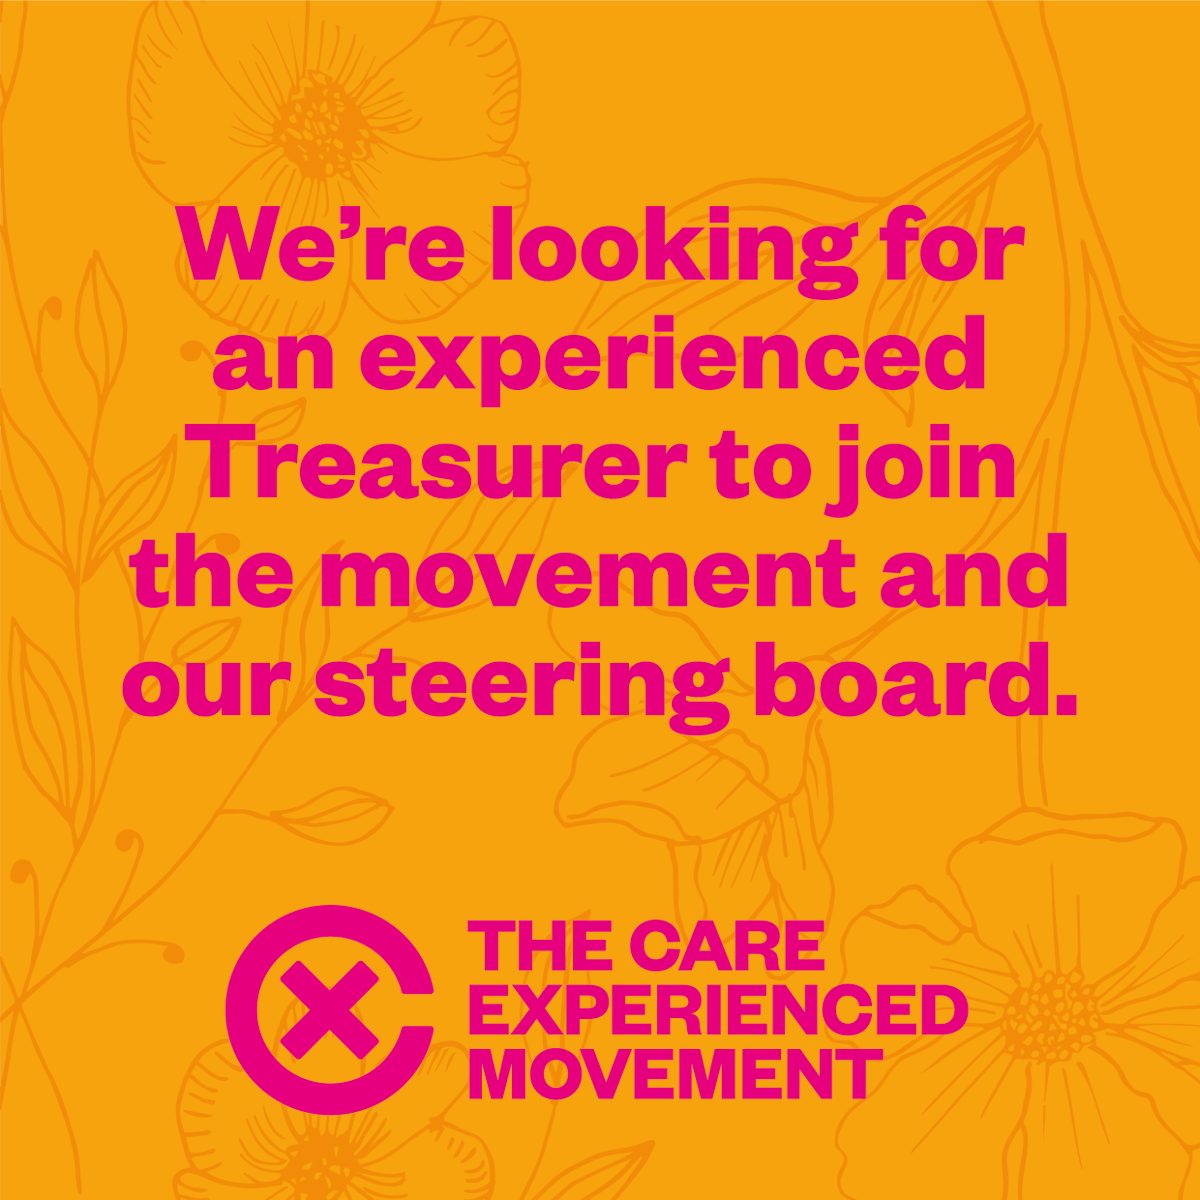 We're currently looking for someone with Treasurer experience to join the movement and our steering board. Please fill out the form below or pass this on to any suitable candidates for the position #CareExperienced #CEP #CareExperiencedMovement

docs.google.com/forms/d/1xVSWh…